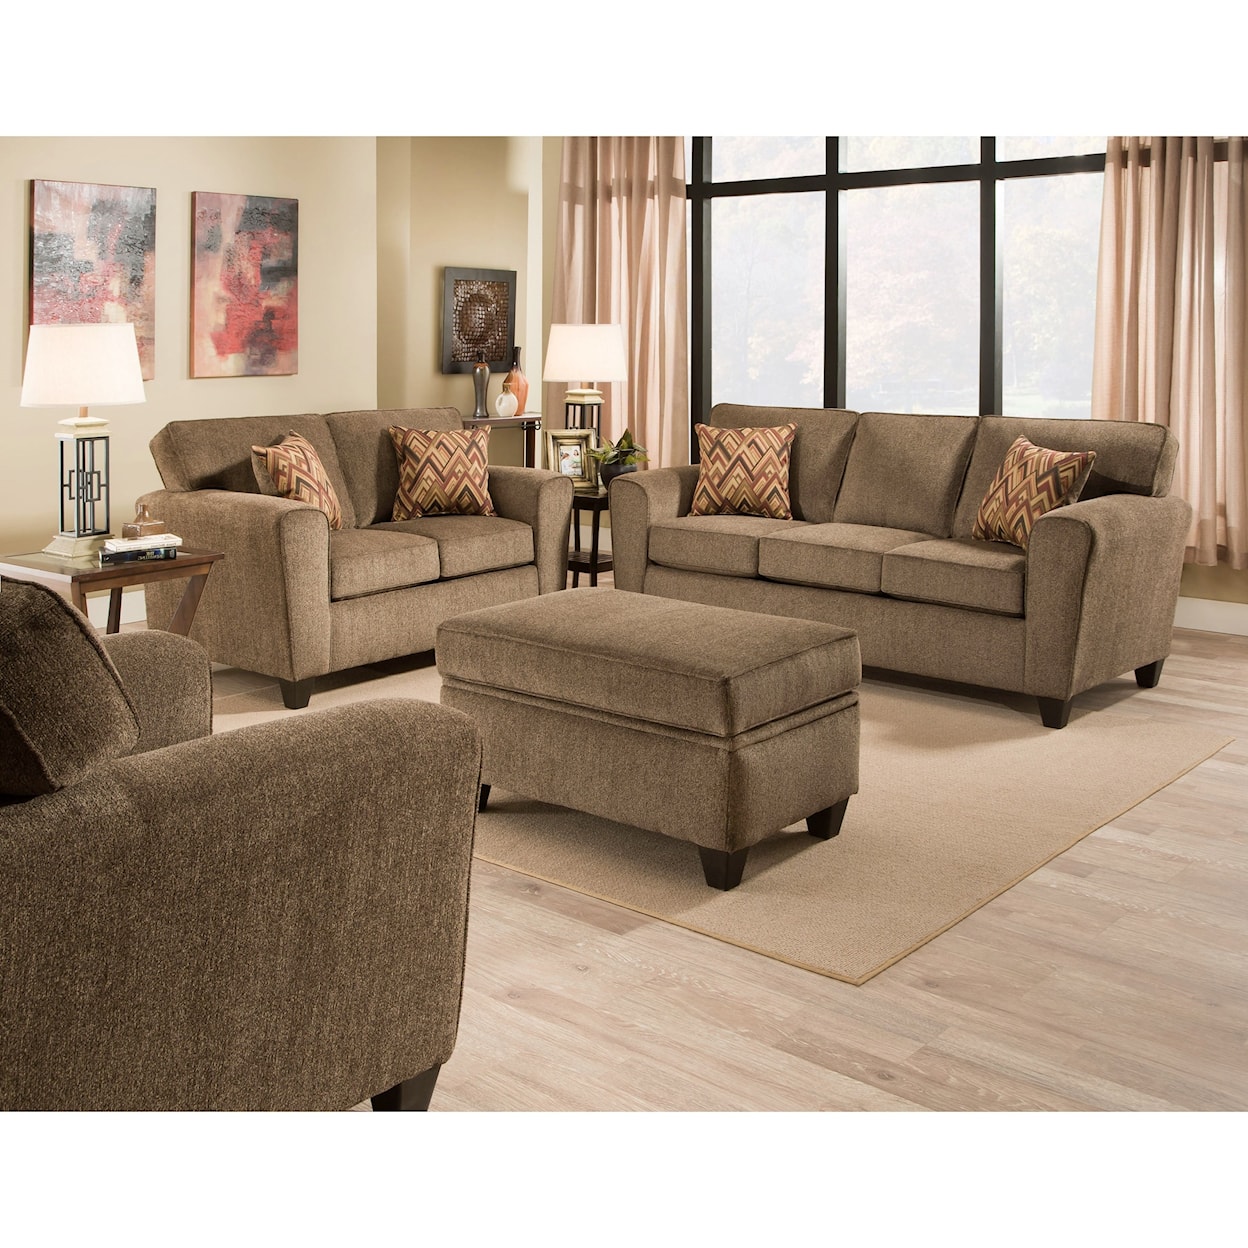 Peak Living 3100 Sofa with Casual Style